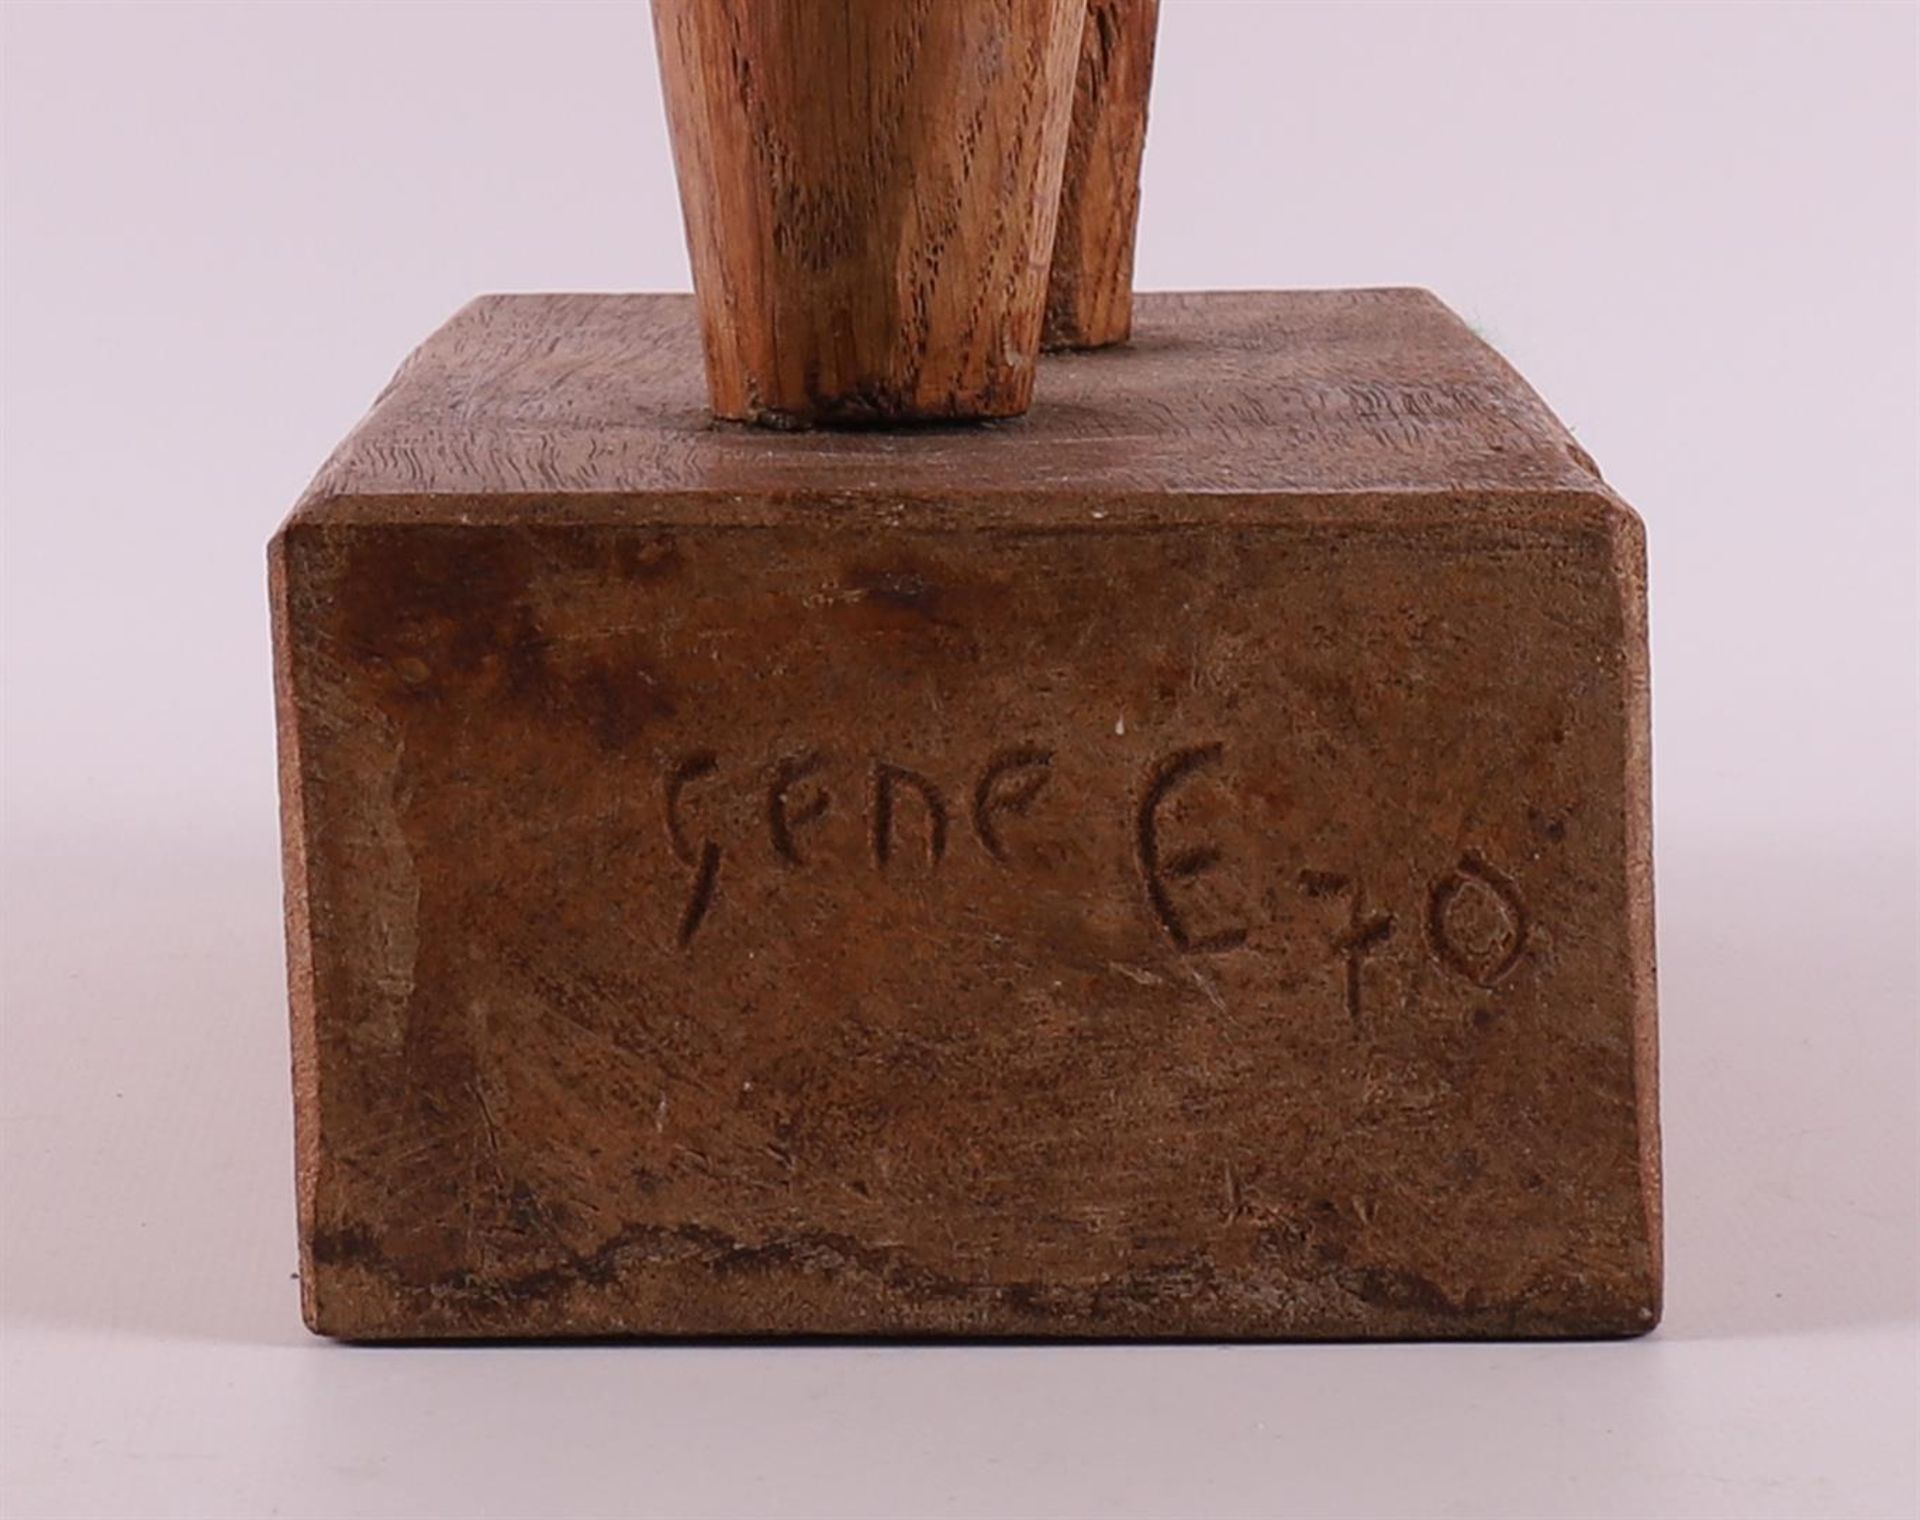 Eggen, Gene (1921-2000) A wooden sculpture of a woman, 2nd half of the 20th cent - Image 7 of 7